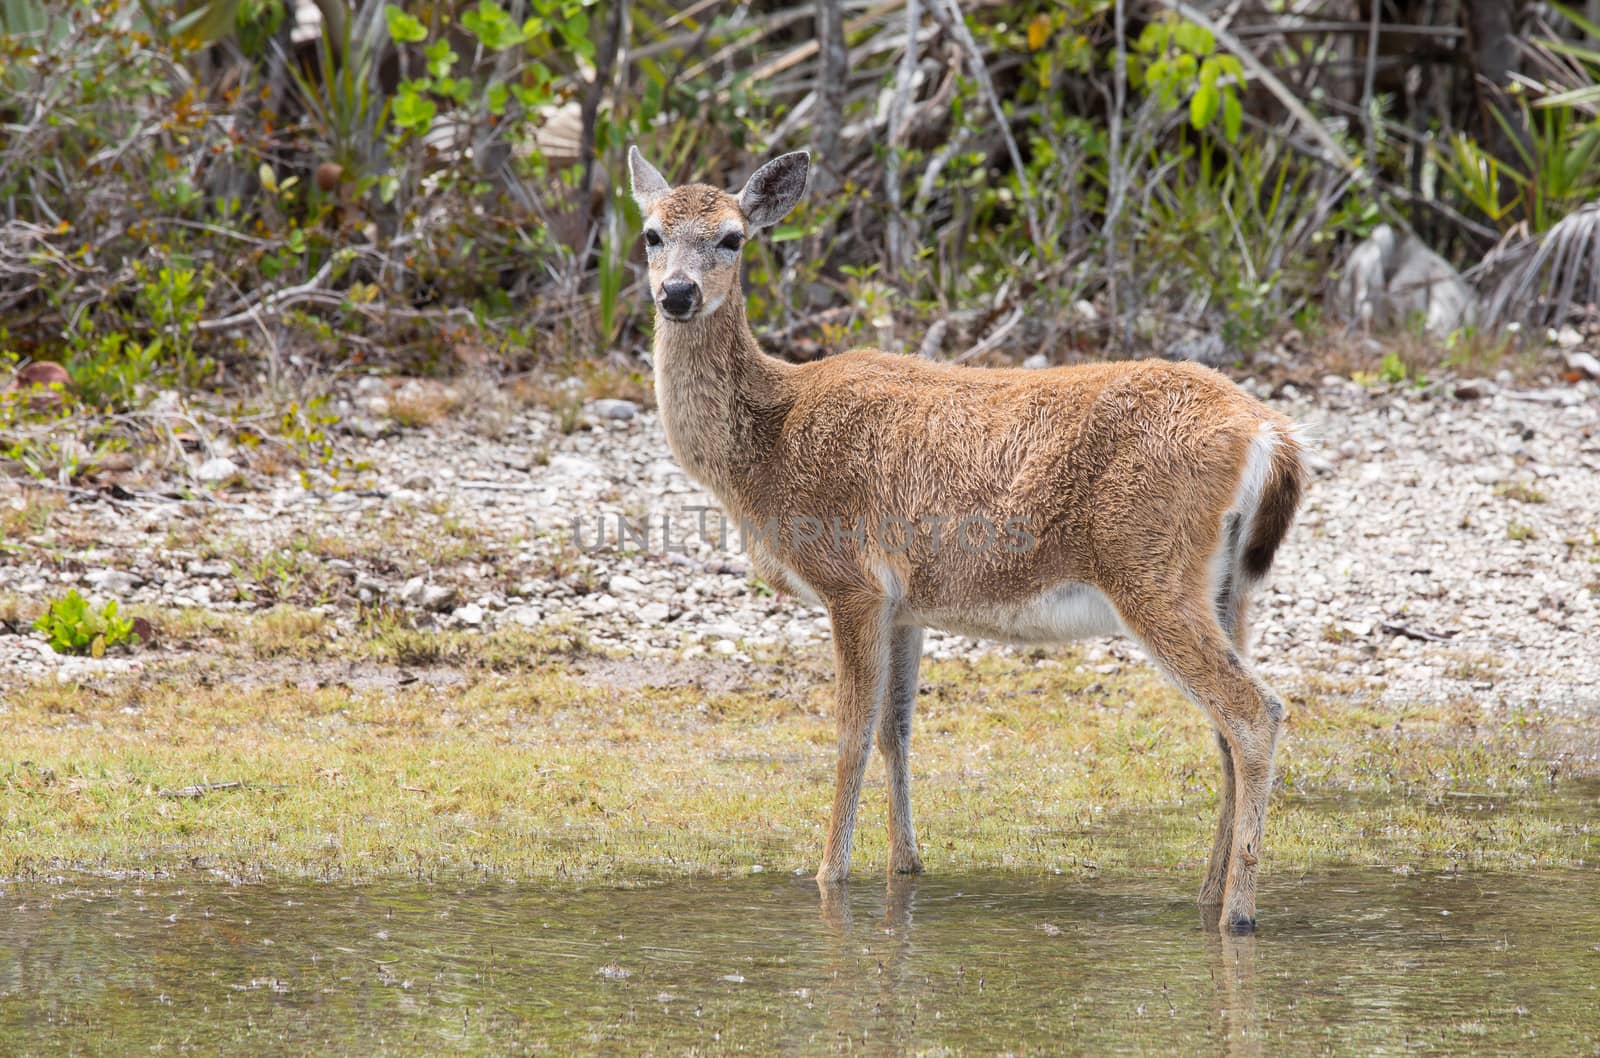 The key deer only live in the Florida Keys. They were nearly extinct in the 1950's dwindling to an estimated 25 deer!. The population now is estimated at between 300 to 800 deer. The key deer remain on the endangered species list and a National Key Deer Refuge has been established in Big Pine Key and No Name Key.